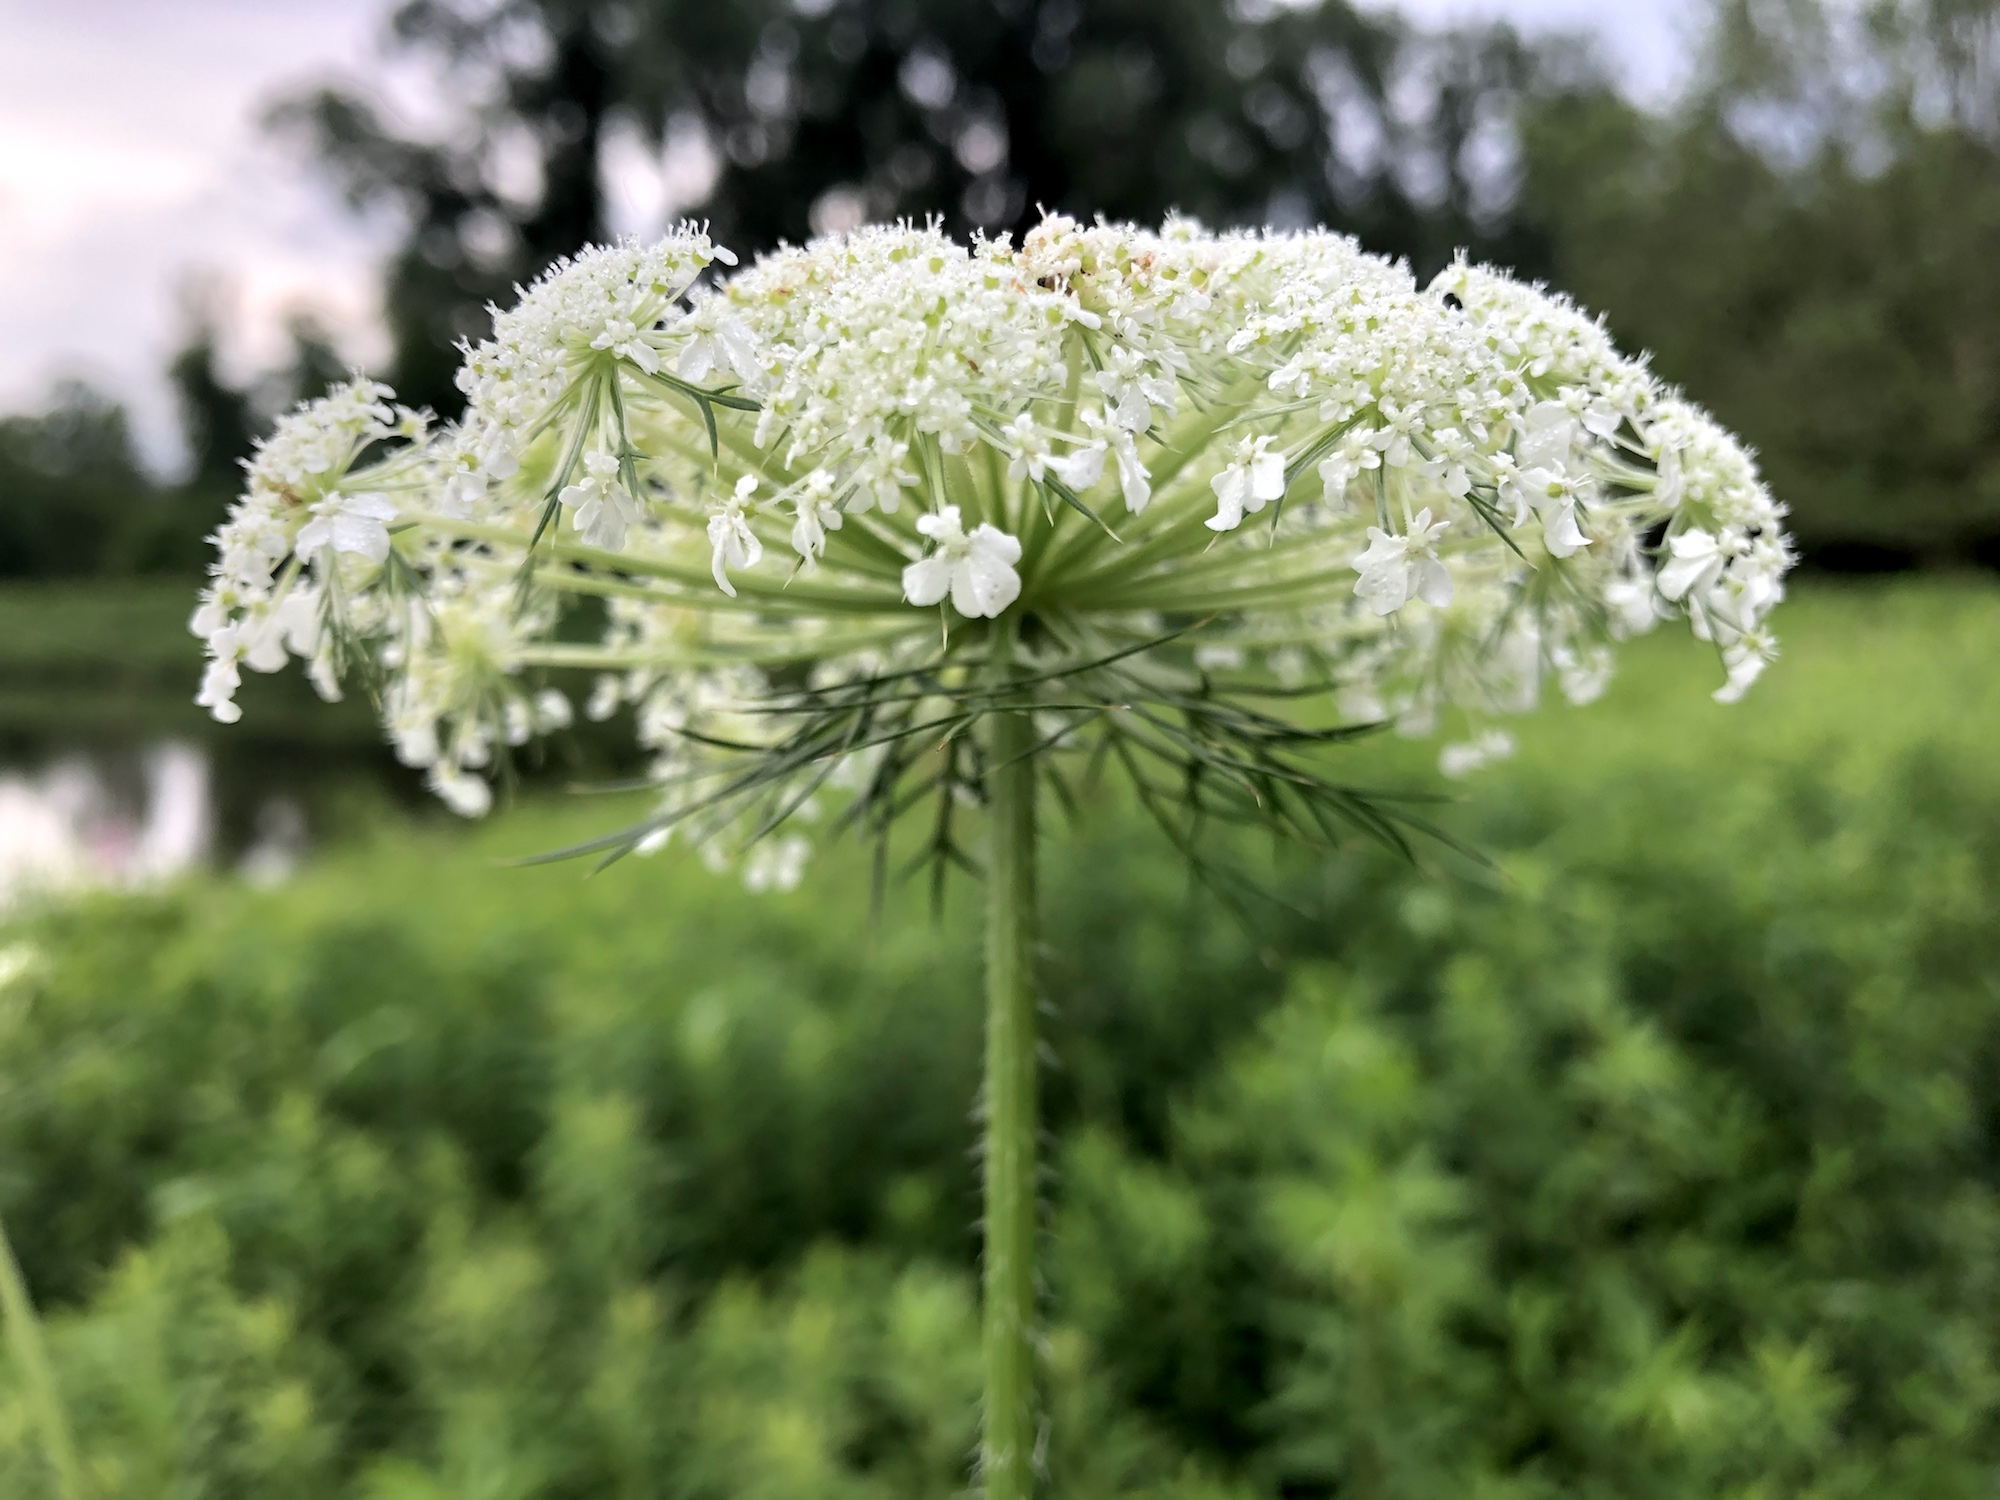 Queen Anne's Lace on bank of retaining pond on the corner of Nakoma Road and Manitou Way in Madison, WI on July 1, 2019.